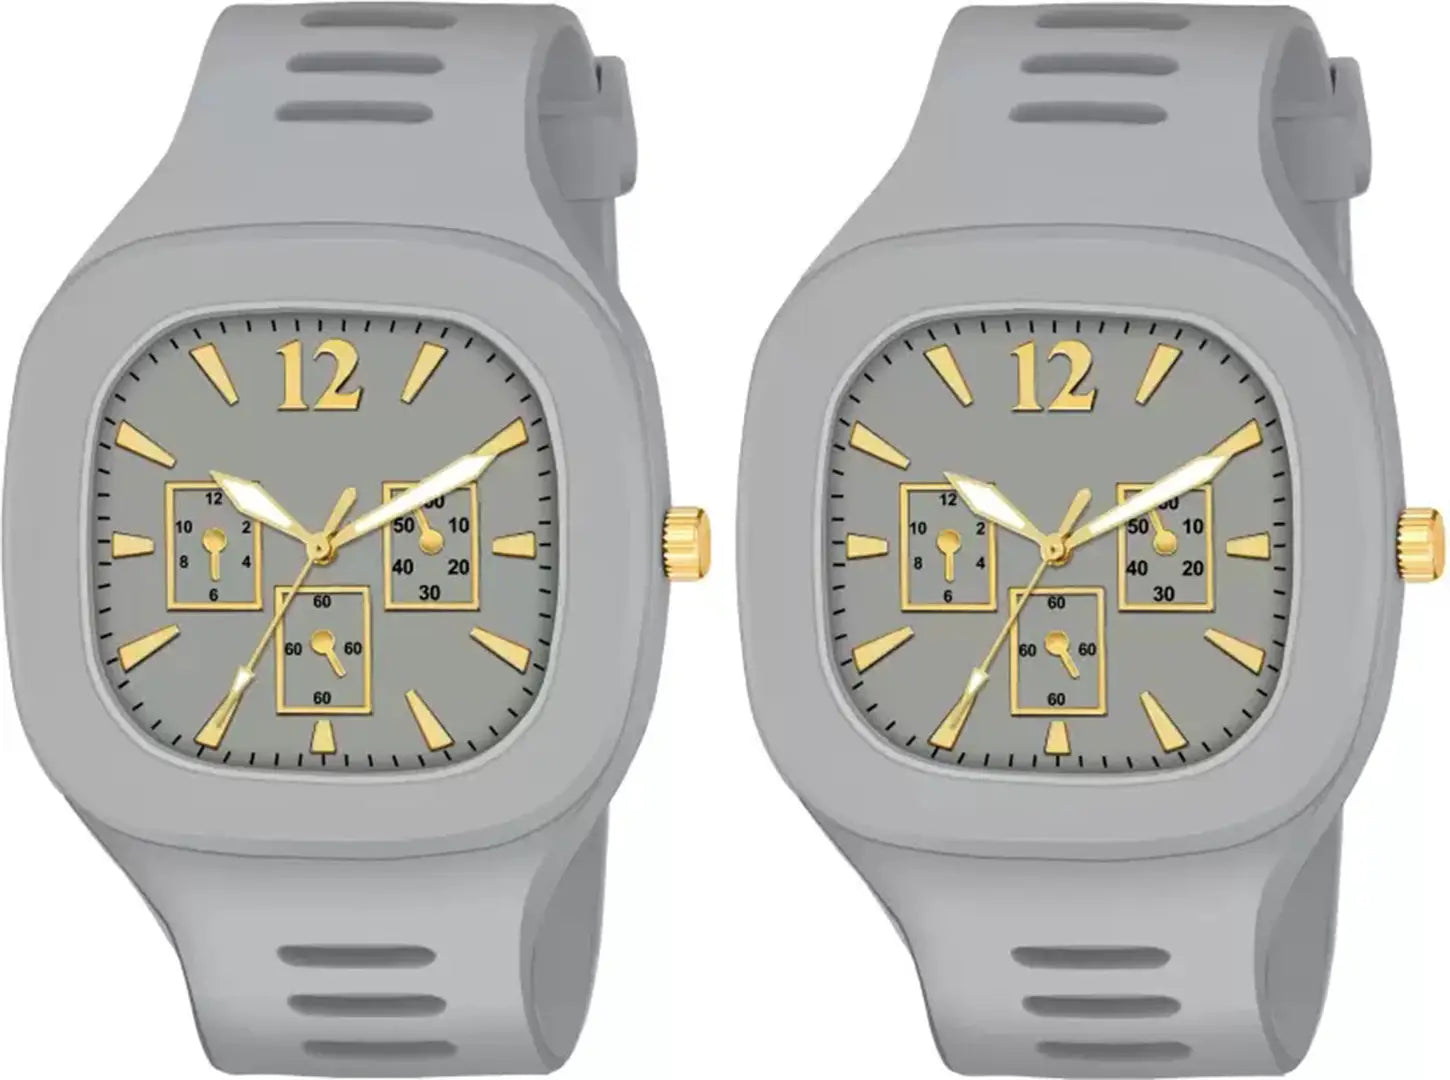 Stylish Grey Silicone Analog Watches For Men Pack Of 2